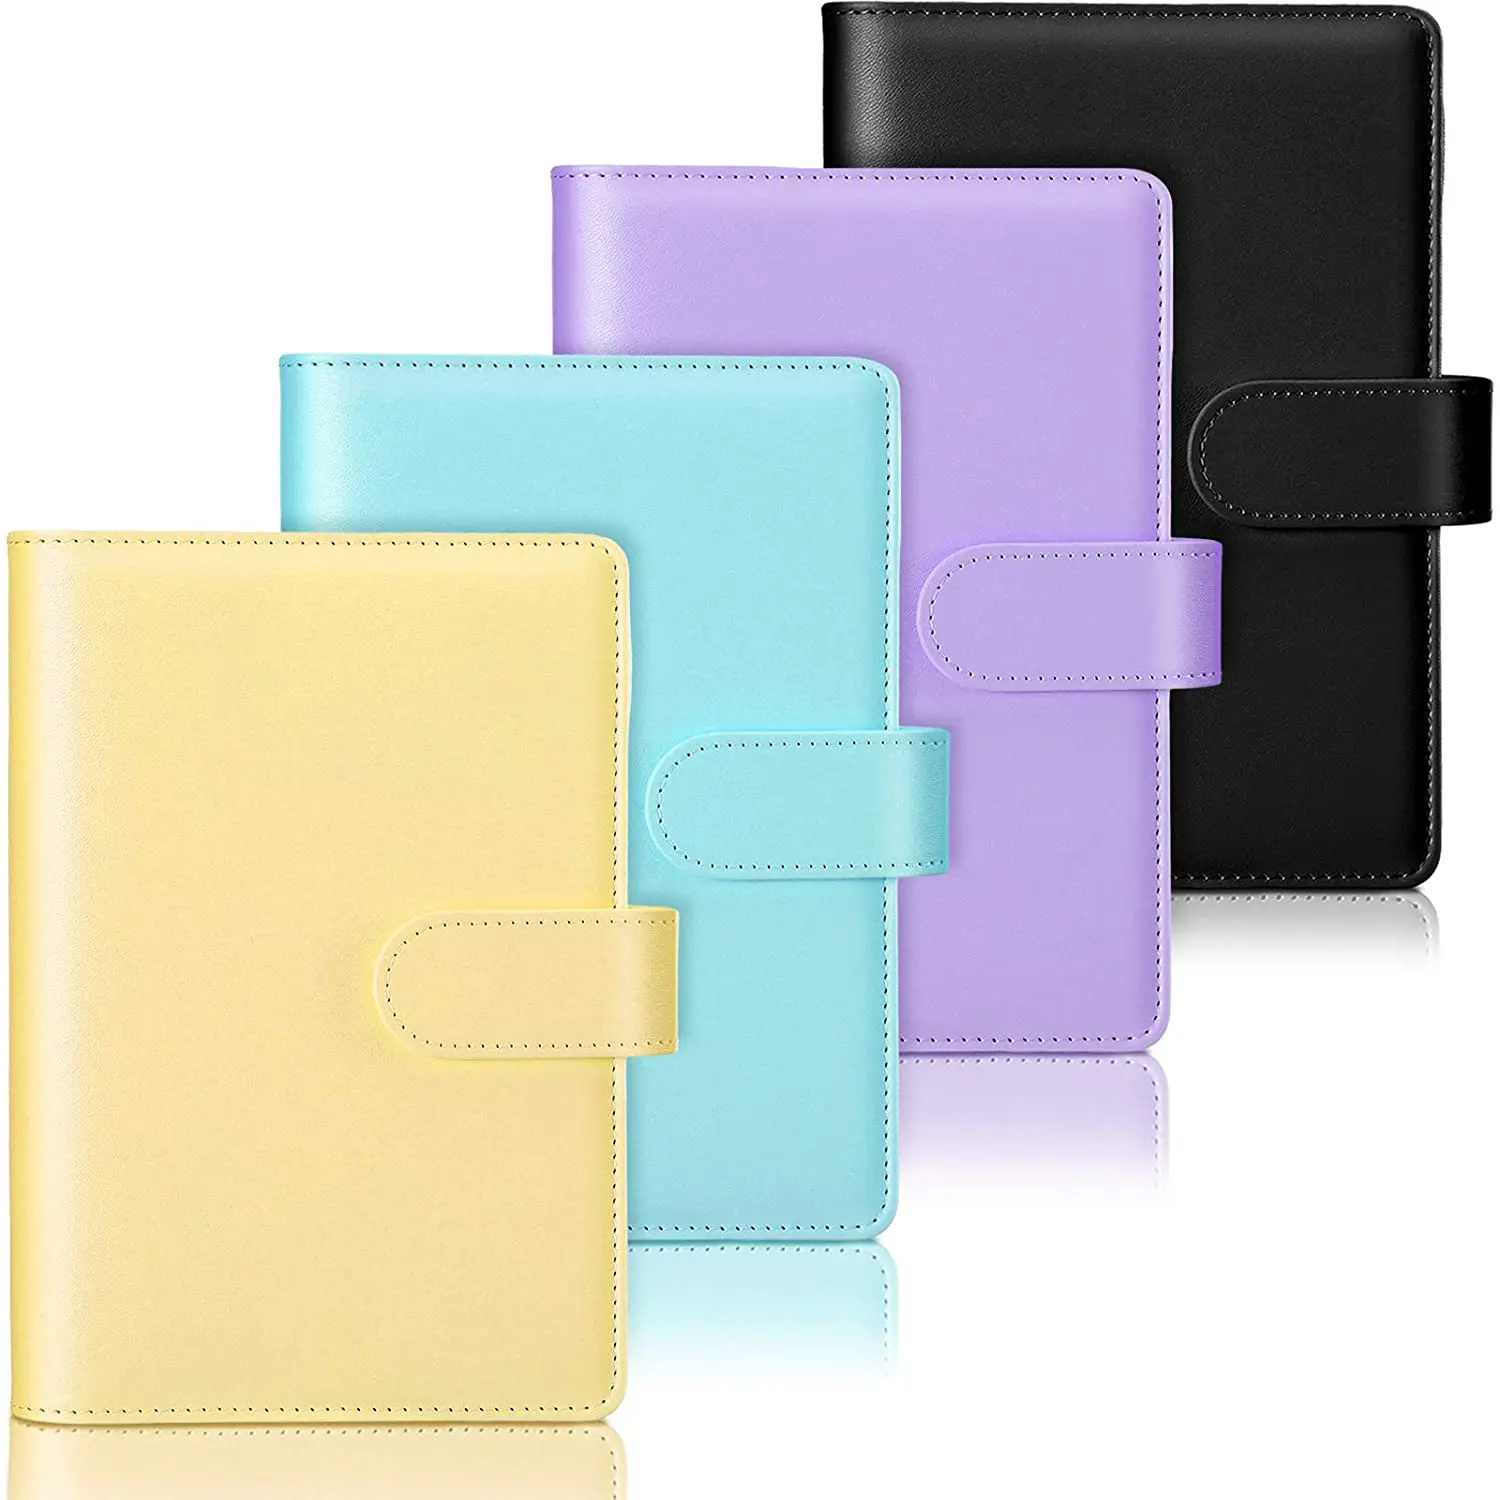 Amazon Best Seller A6 Artificial Leather PU Notebook With Loose Leaf Binder Refillable 6 Ring Binder Cover For Office Students